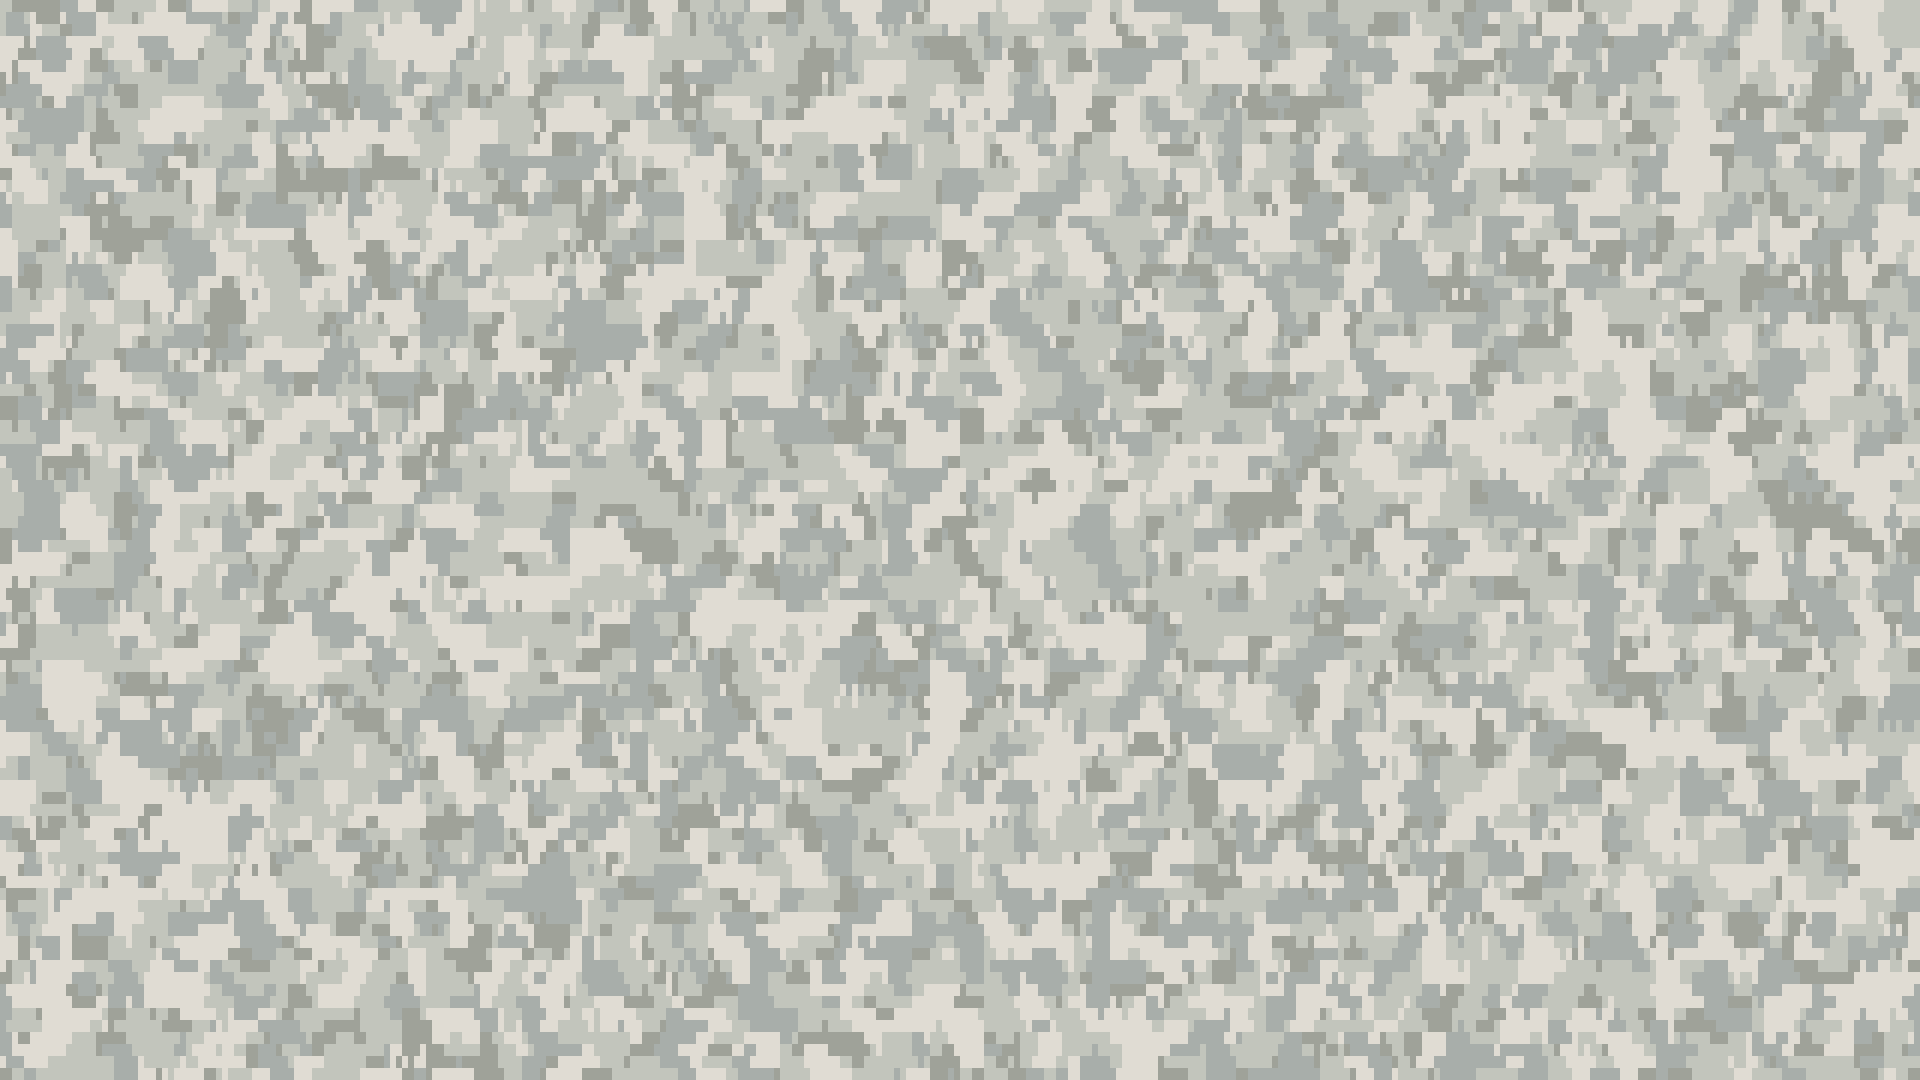 Displaying 15 Images For   Military Digital Camo Wallpaper 1920x1080